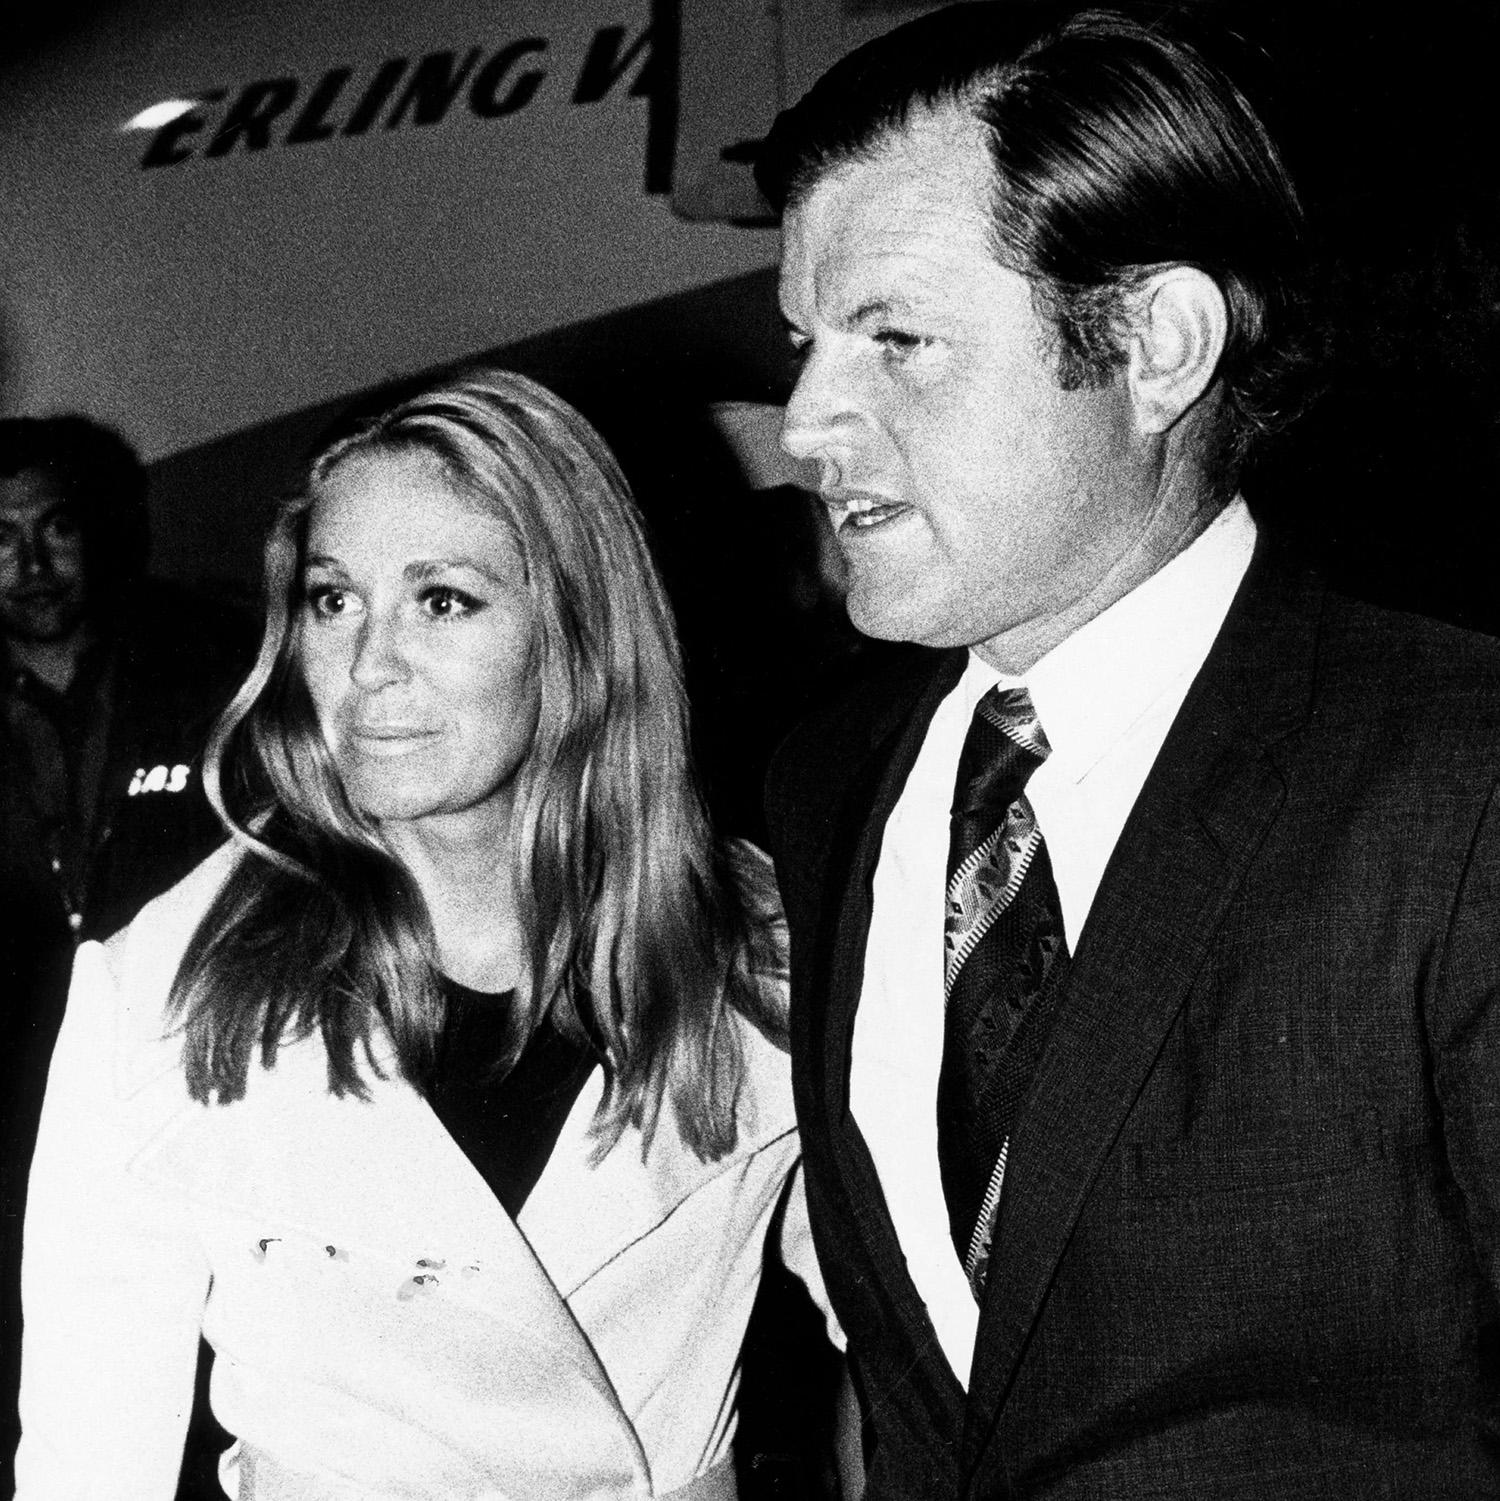 Image of Joan Kennedy with husband Ted Kennedy